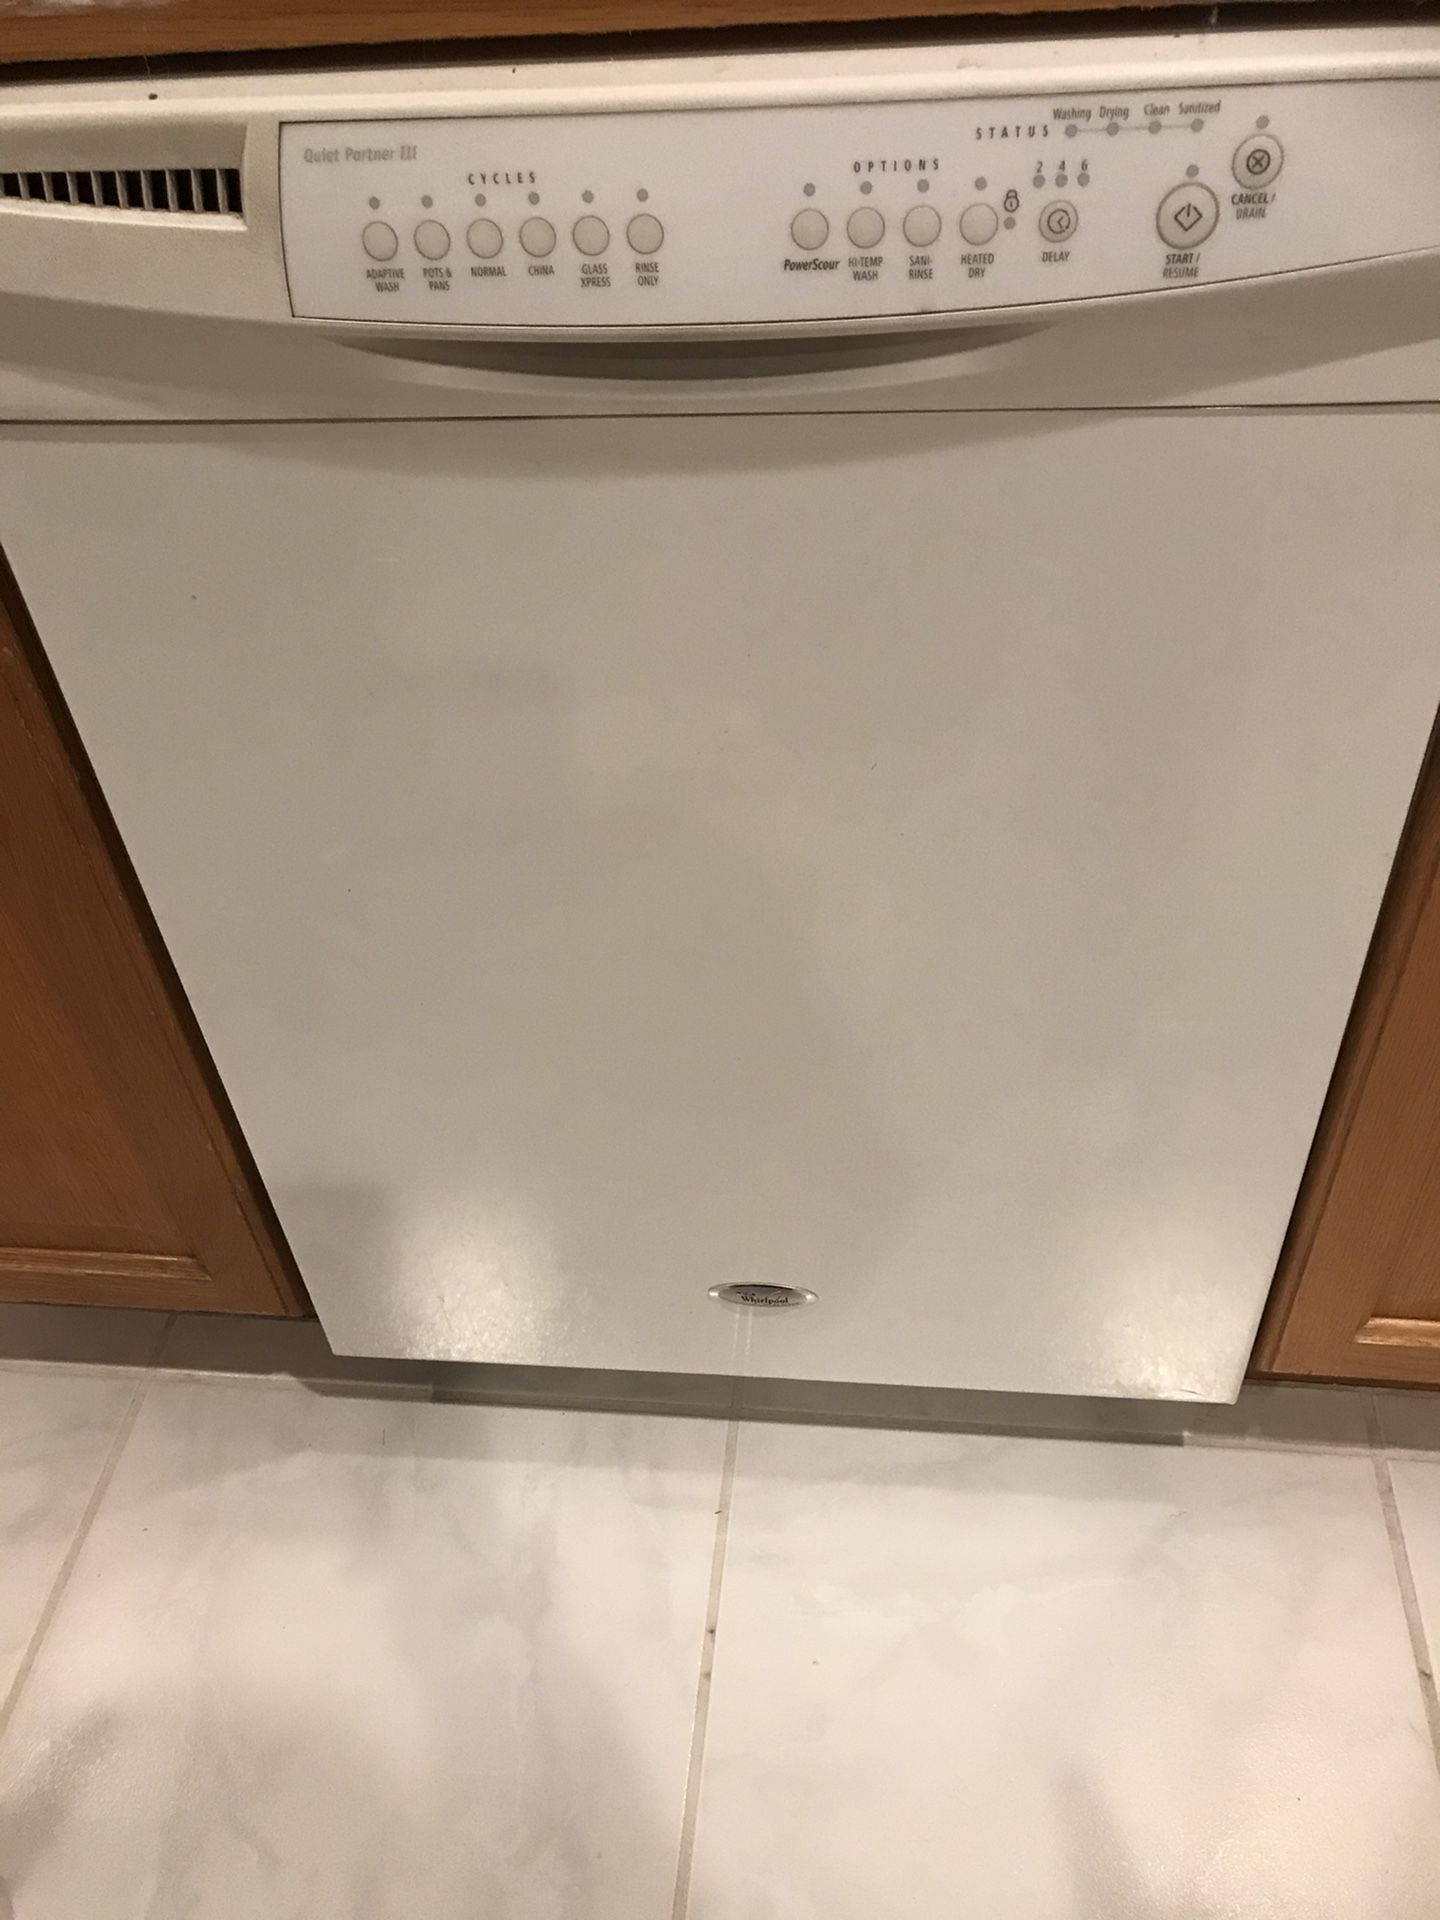 Whirlpool dishwasher and Kitchen Aid trash compactor. Both in great condition. Working great. Getting new appliances. Will sell separately too.